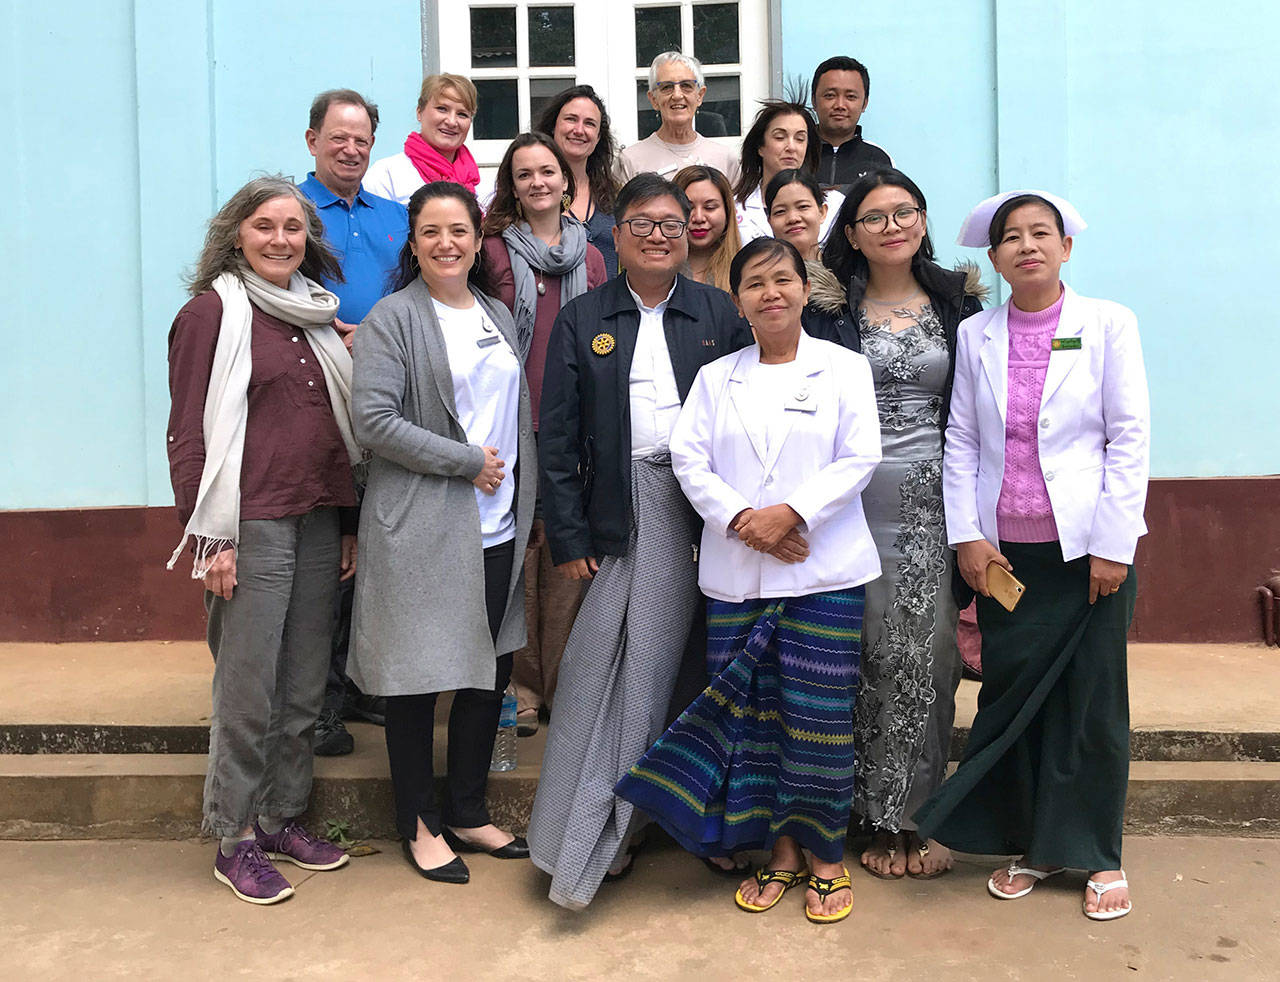 Colin Hennessey, Lin Holley, Eliza Steele and Heather Russell are the four islanders who went on the trip. They are pictured above, outside the hospital in Pindaya, Myanmar, along with others working on the project. (Courtesy Photo)